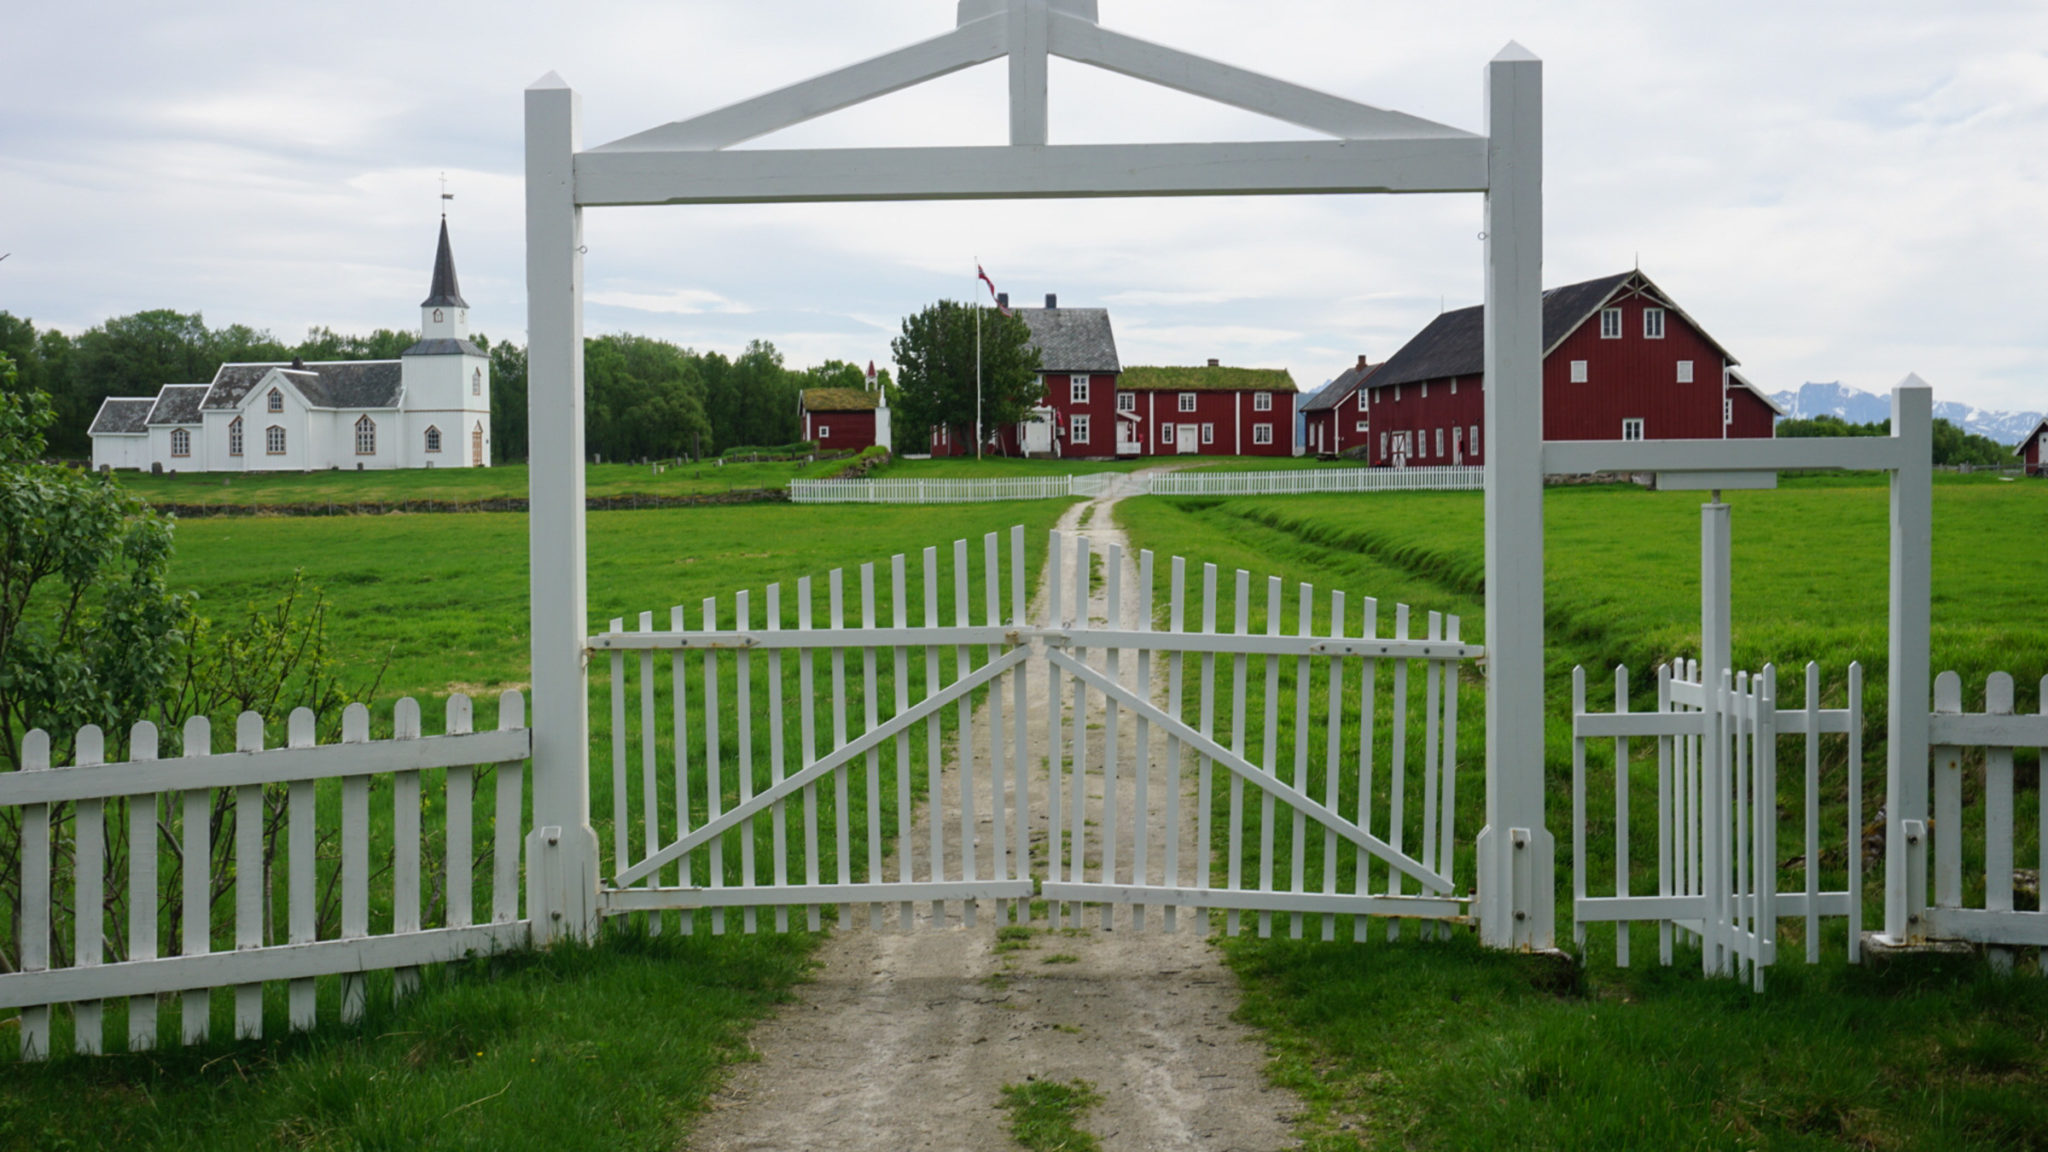 The gates to the vicarage of Tranøy © Knut Hansvold